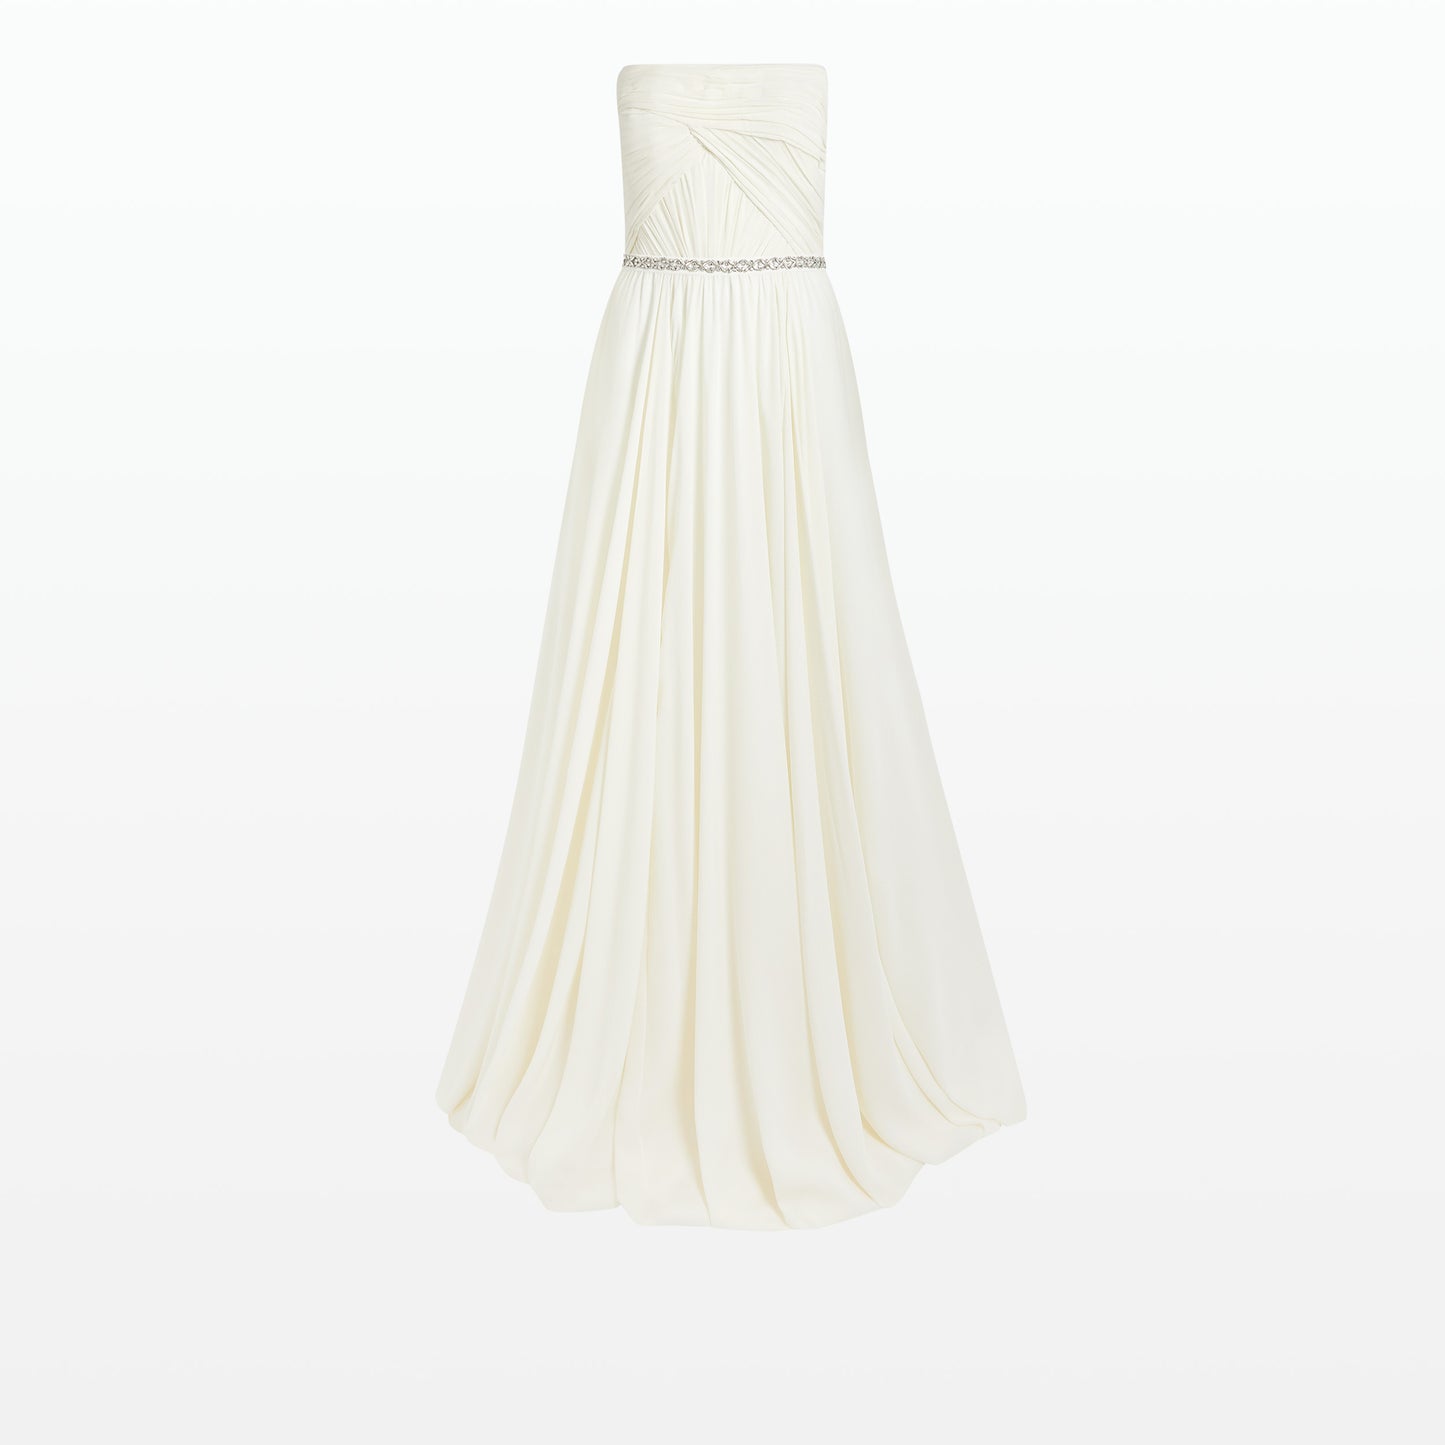 Adora Ivory Long Dress With Embroidered Belt